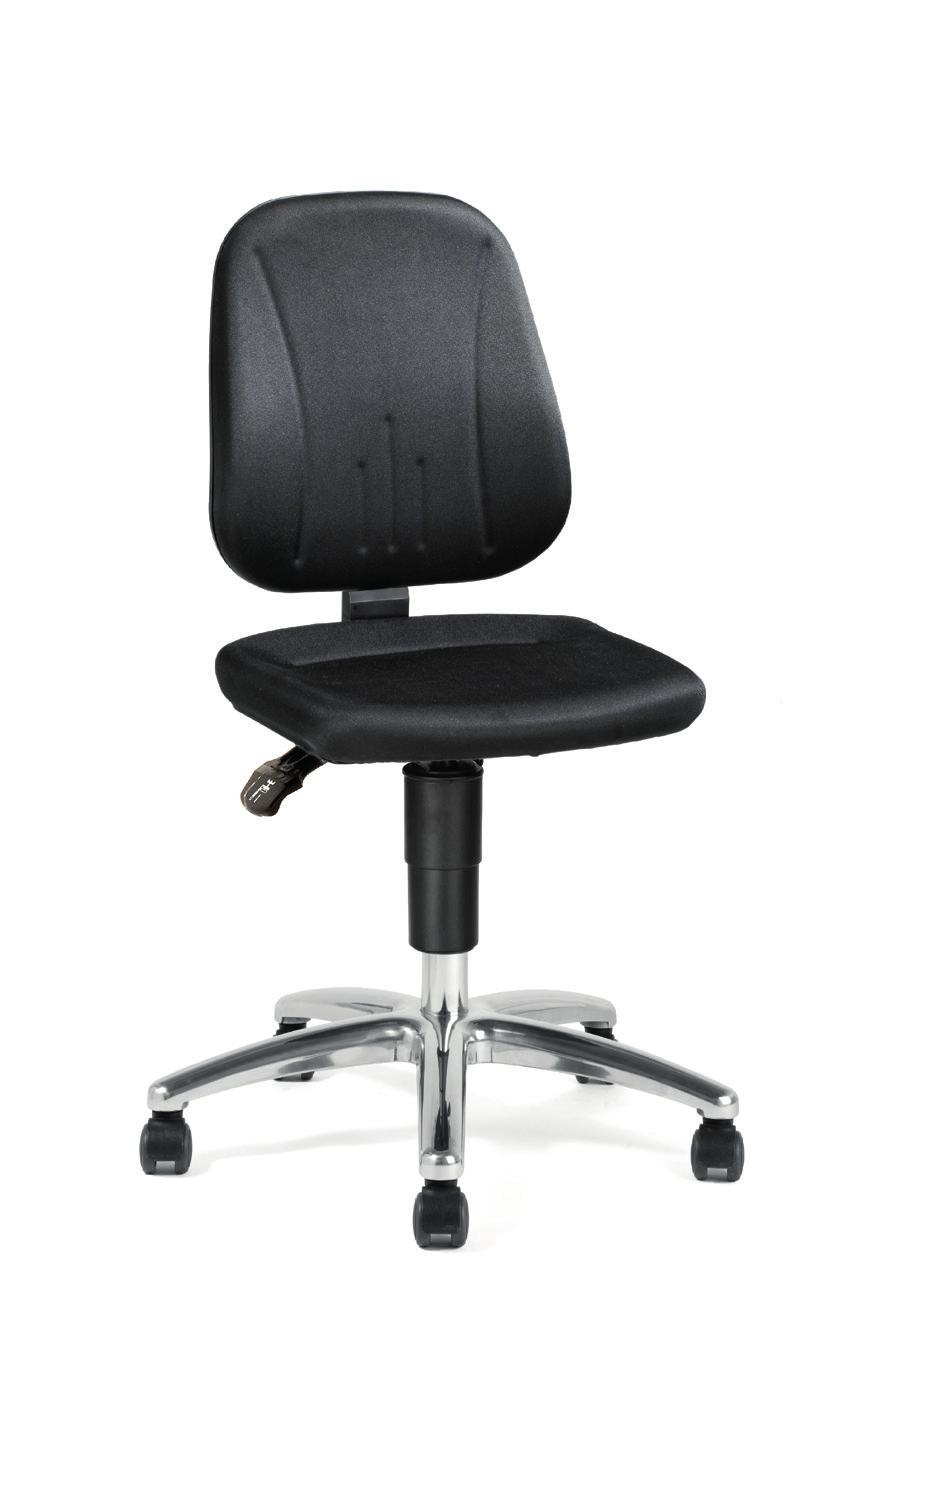 Ergo Multipurpose chair for almost any application in the industry User-friendly and quick adjustability Excellent price-performance ratio Large, ergonomically designed seat and backrest and lumbar